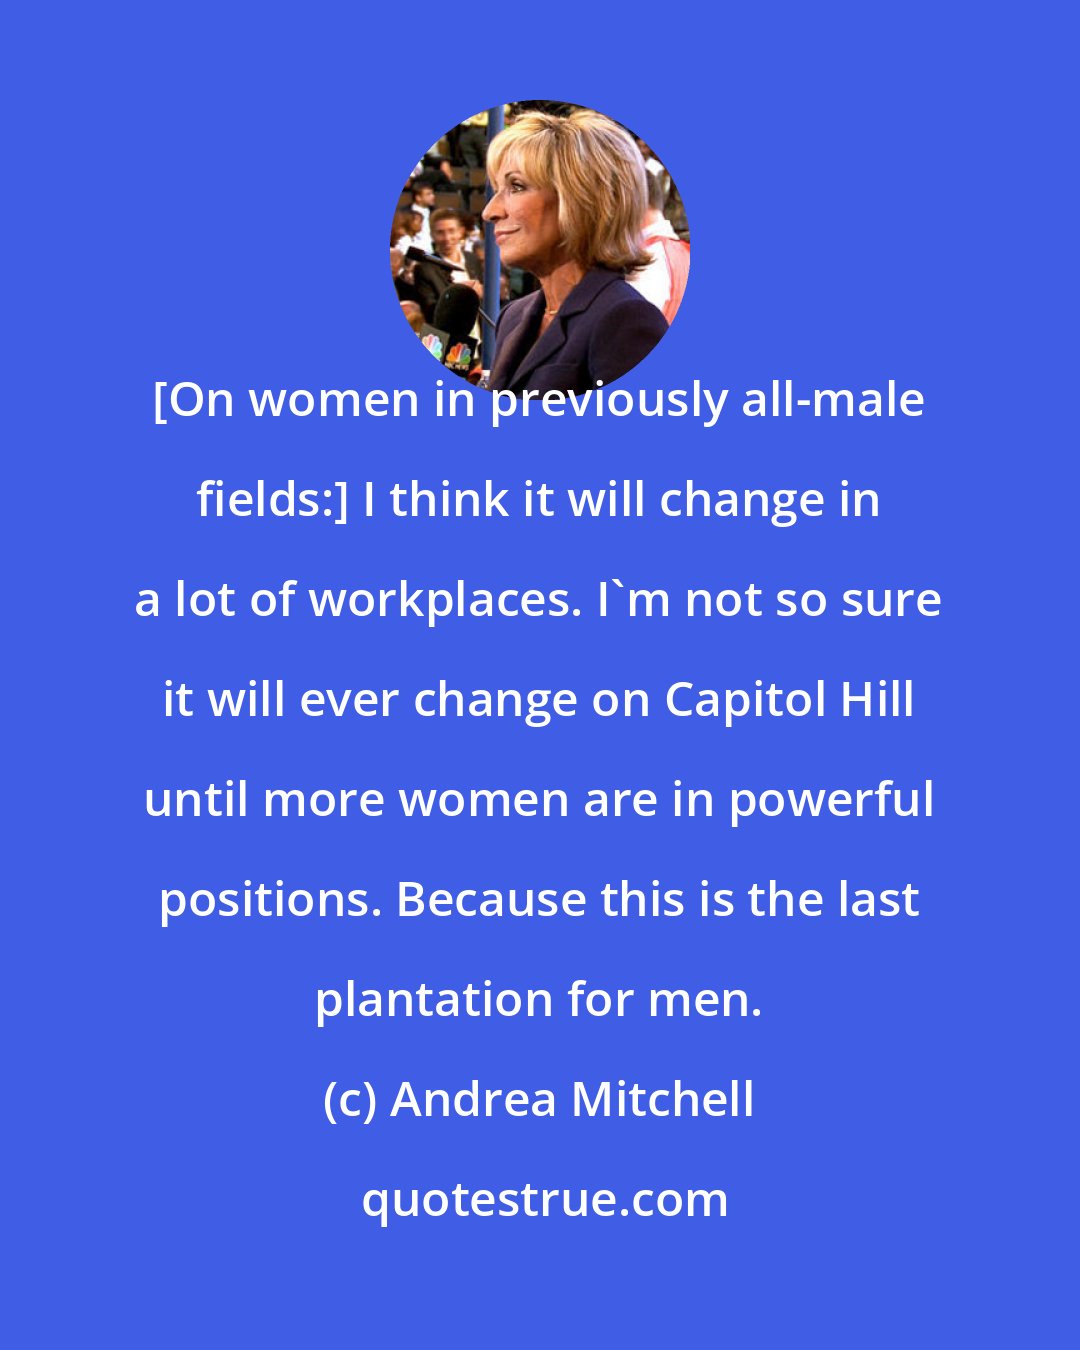 Andrea Mitchell: [On women in previously all-male fields:] I think it will change in a lot of workplaces. I'm not so sure it will ever change on Capitol Hill until more women are in powerful positions. Because this is the last plantation for men.